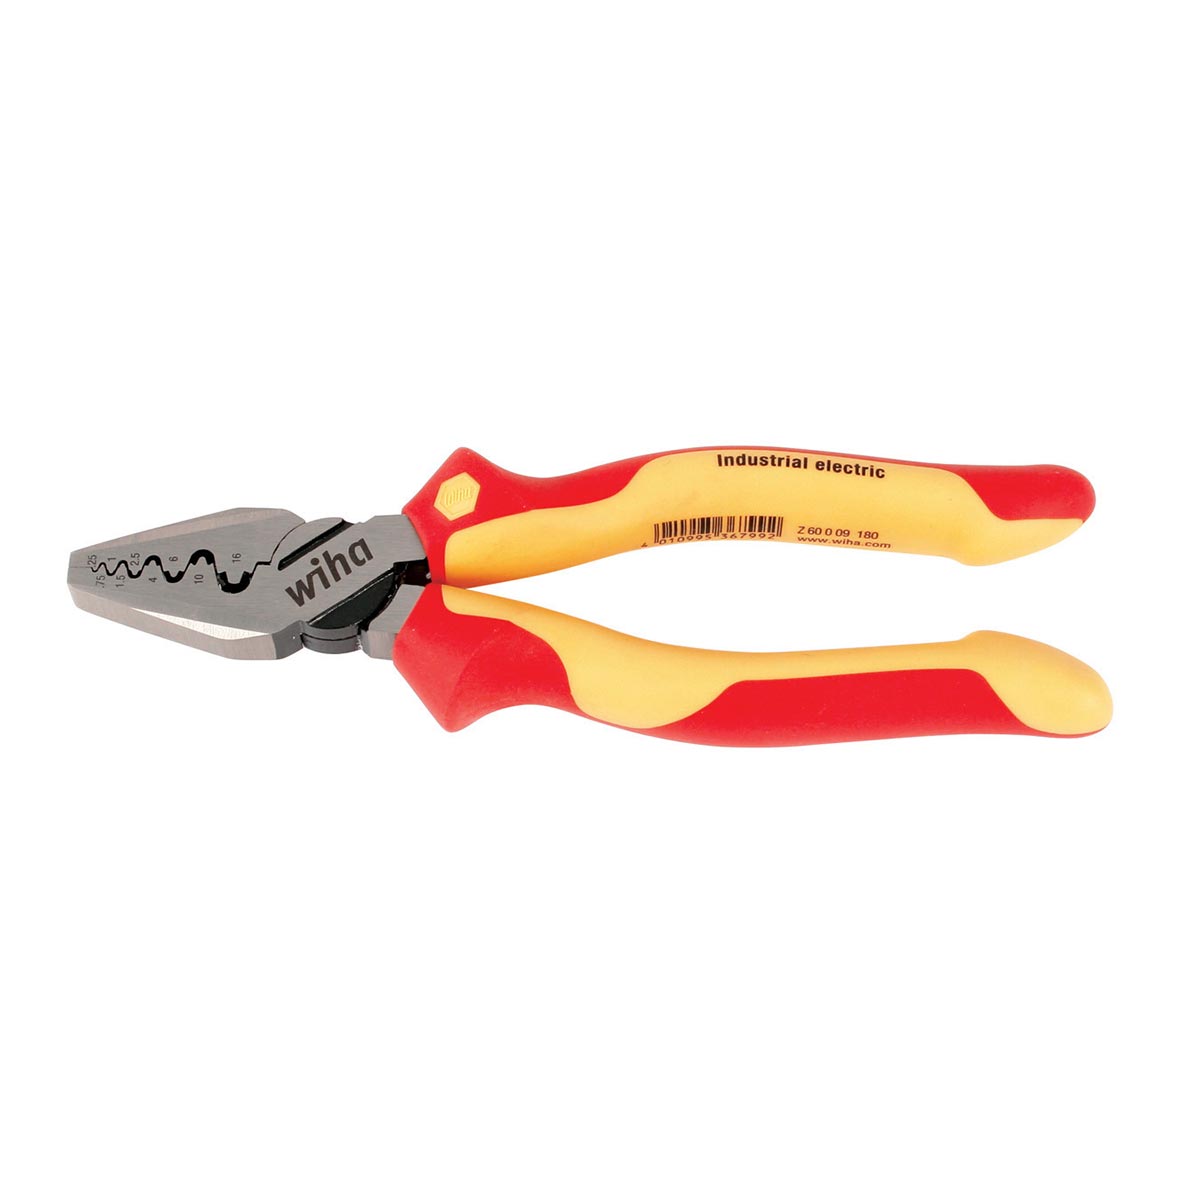 Wiha Insulated Industrial 7" Crimping Pliers